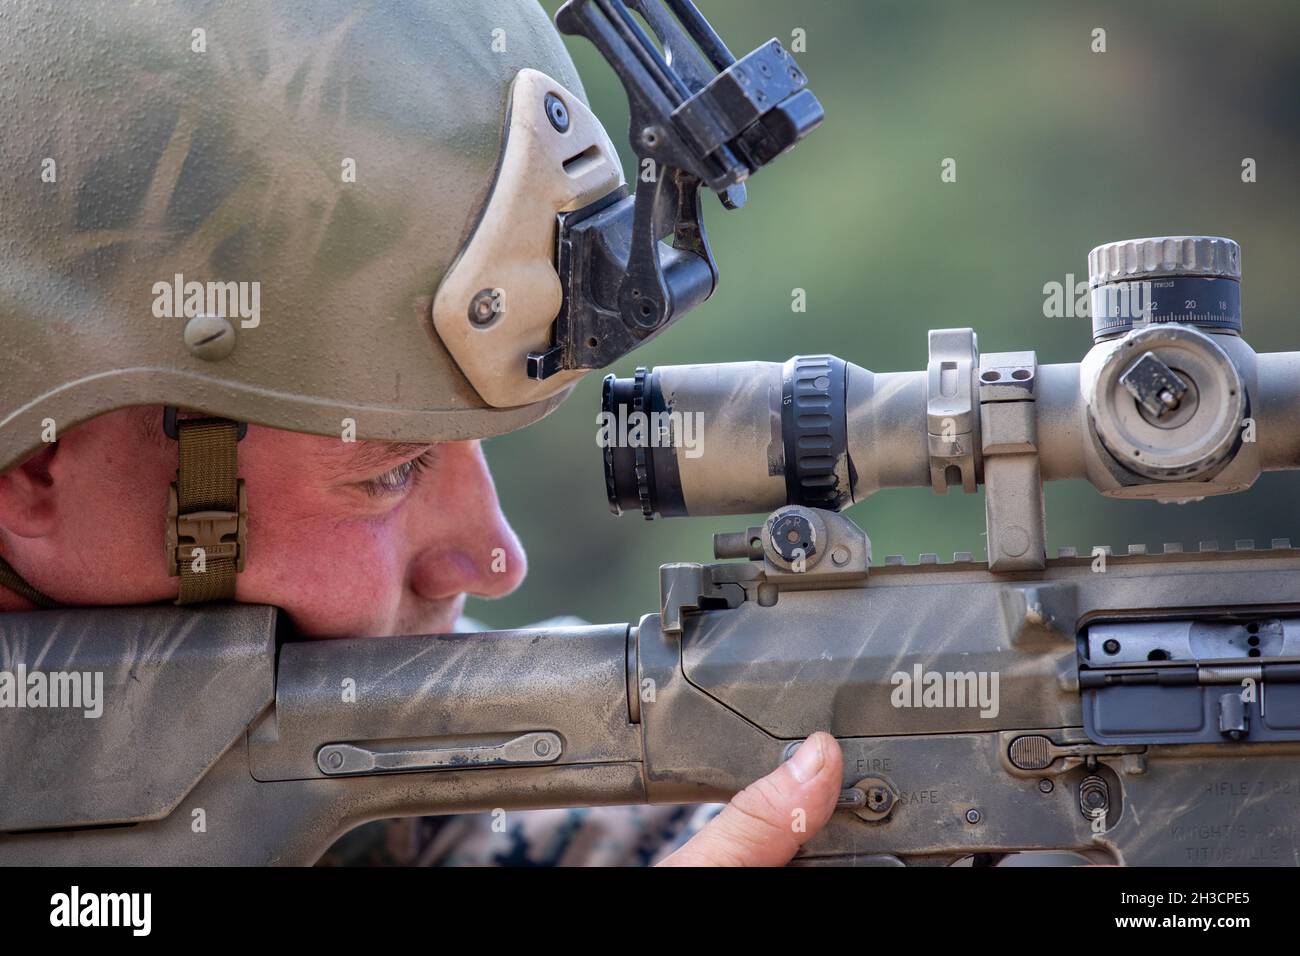 U.S. Marine Corps Cpl. Connor Swanson, a scout sniper with 2d Battalion, 3rd Marine Regiment, looks through the scope on an M110 Semi-Automatic Sniper System during a sniper shoot during Korea Marine Exchange Program 22-1 at Camp Rodriguez, Pocheon, Republic of Korea, Oct. 15, 2021. The training allowed Marines to sustain the fundamentals of marksmanship. (U.S. Marine Corps photo by Sgt. Ash McLaughlin) Stock Photo